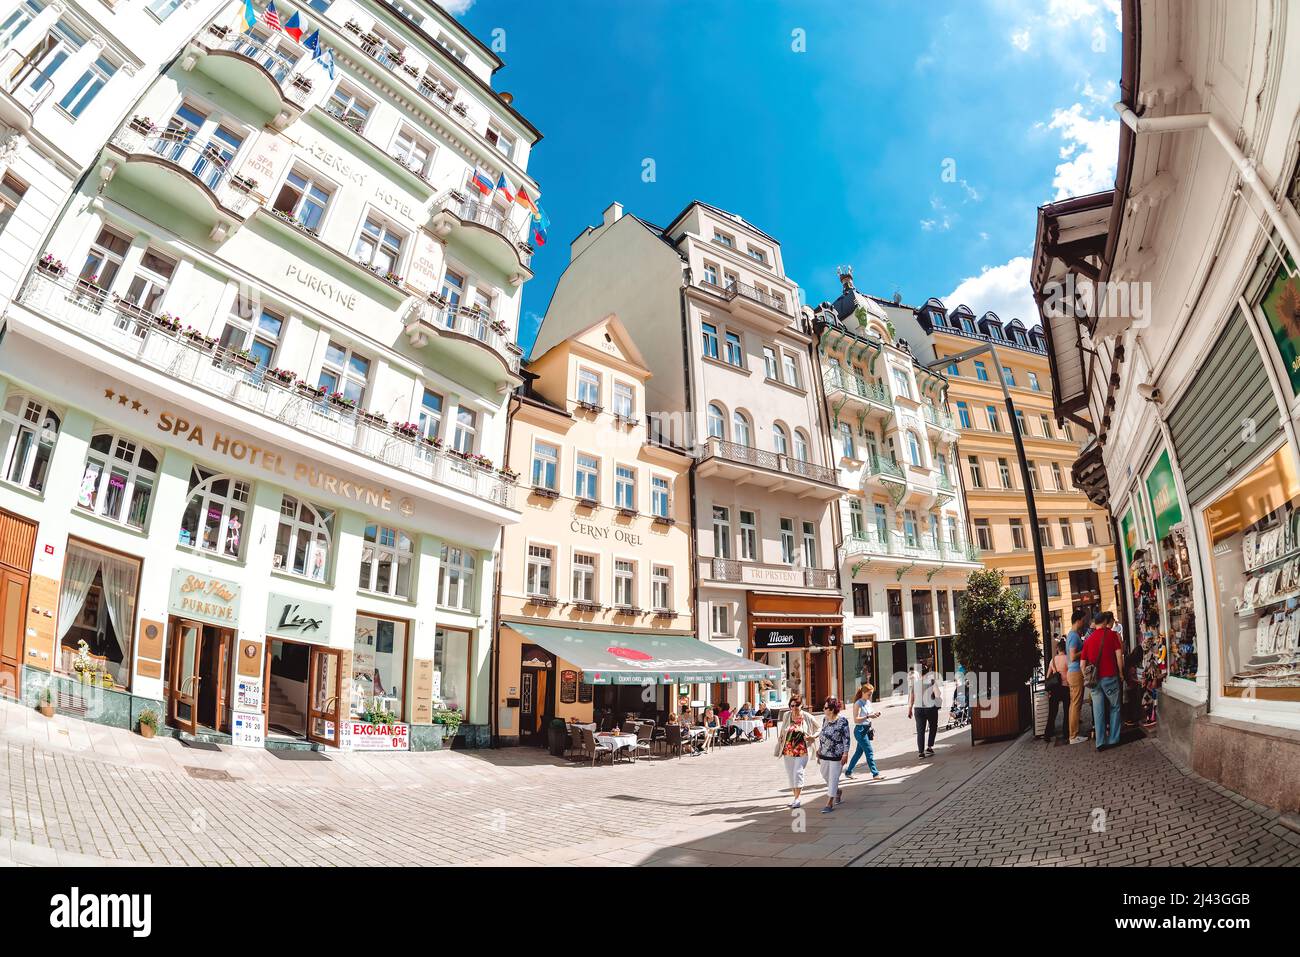 Karlovy Vary, Czech Republic - May 26, 2017: Tourists walking by pedestrian street with shops and hotel Stock Photo